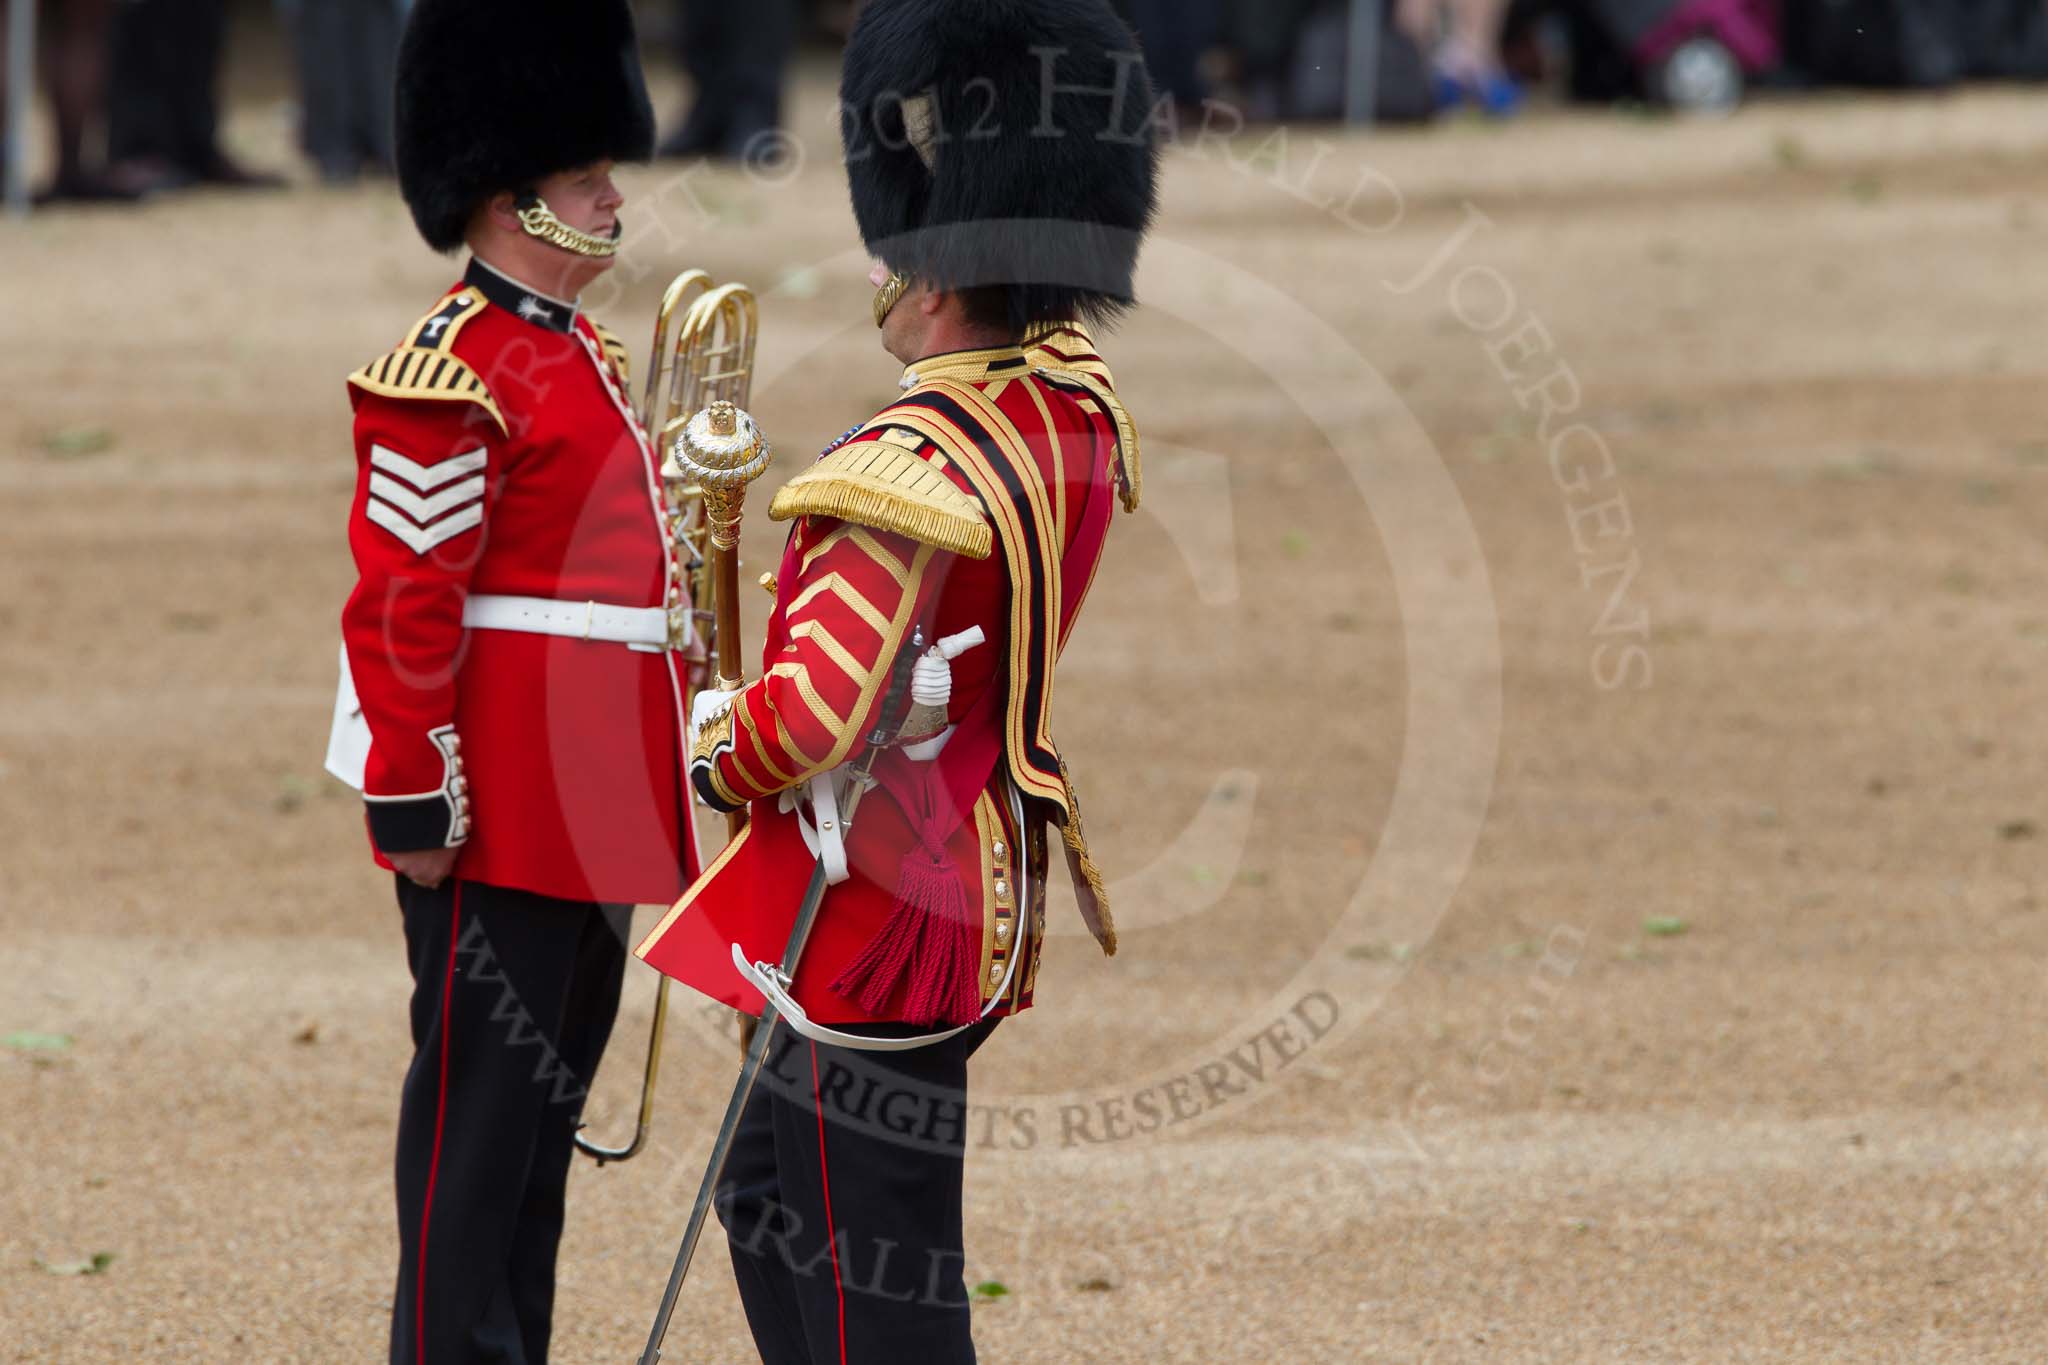 The Colonel's Review 2012: The first of the Massed Bands arriving at Horse Guards Parade - the Band of the Welsh Guards, led by Seniour Drum Major M Betts, Grenadier Guards..
Horse Guards Parade, Westminster,
London SW1,

United Kingdom,
on 09 June 2012 at 10:12, image #22